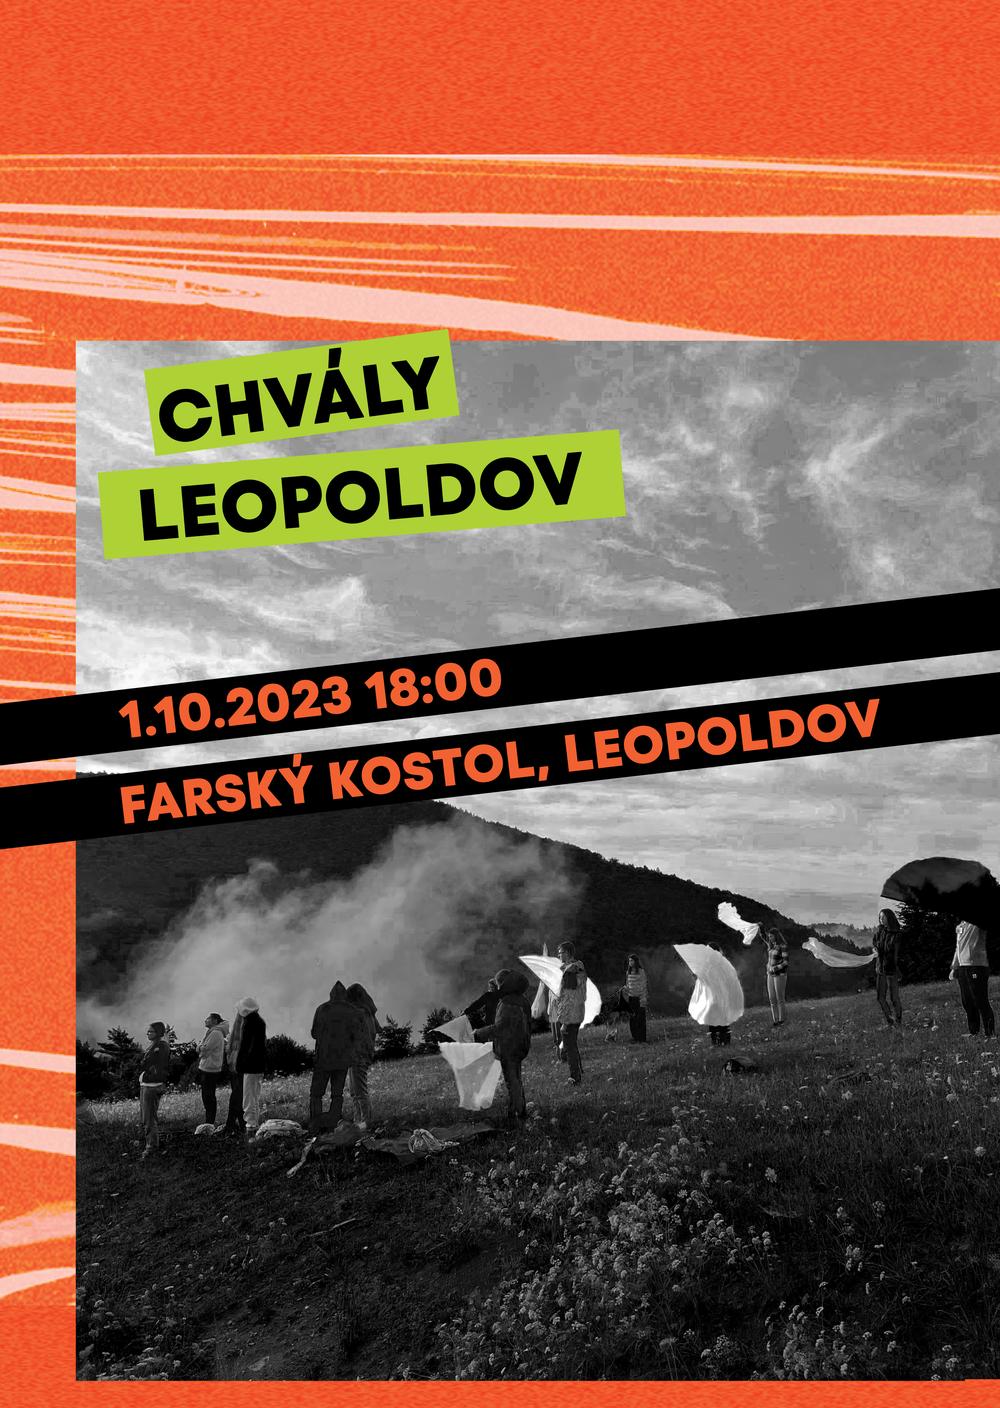 Chvaly 01102023